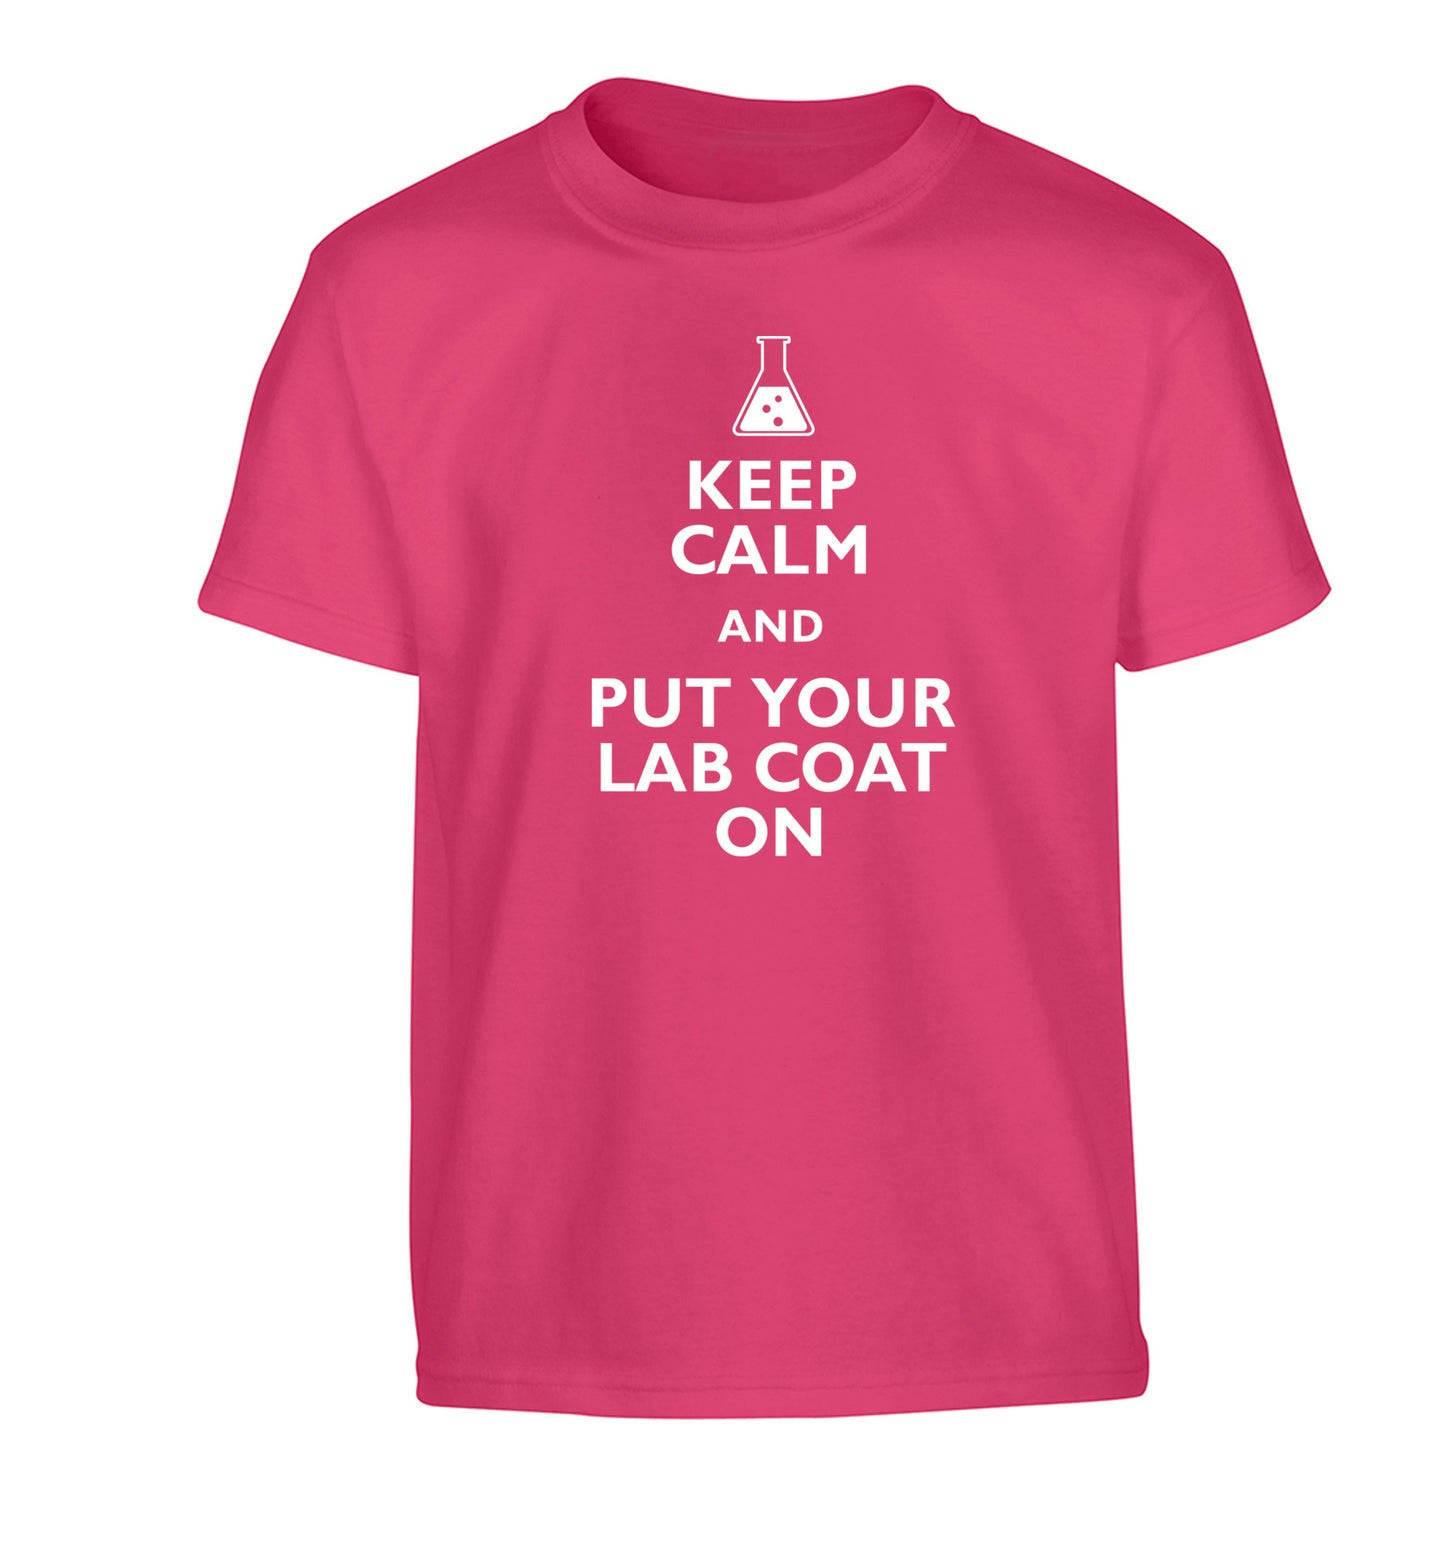 Keep calm and put your lab coat on Children's pink Tshirt 12-14 Years